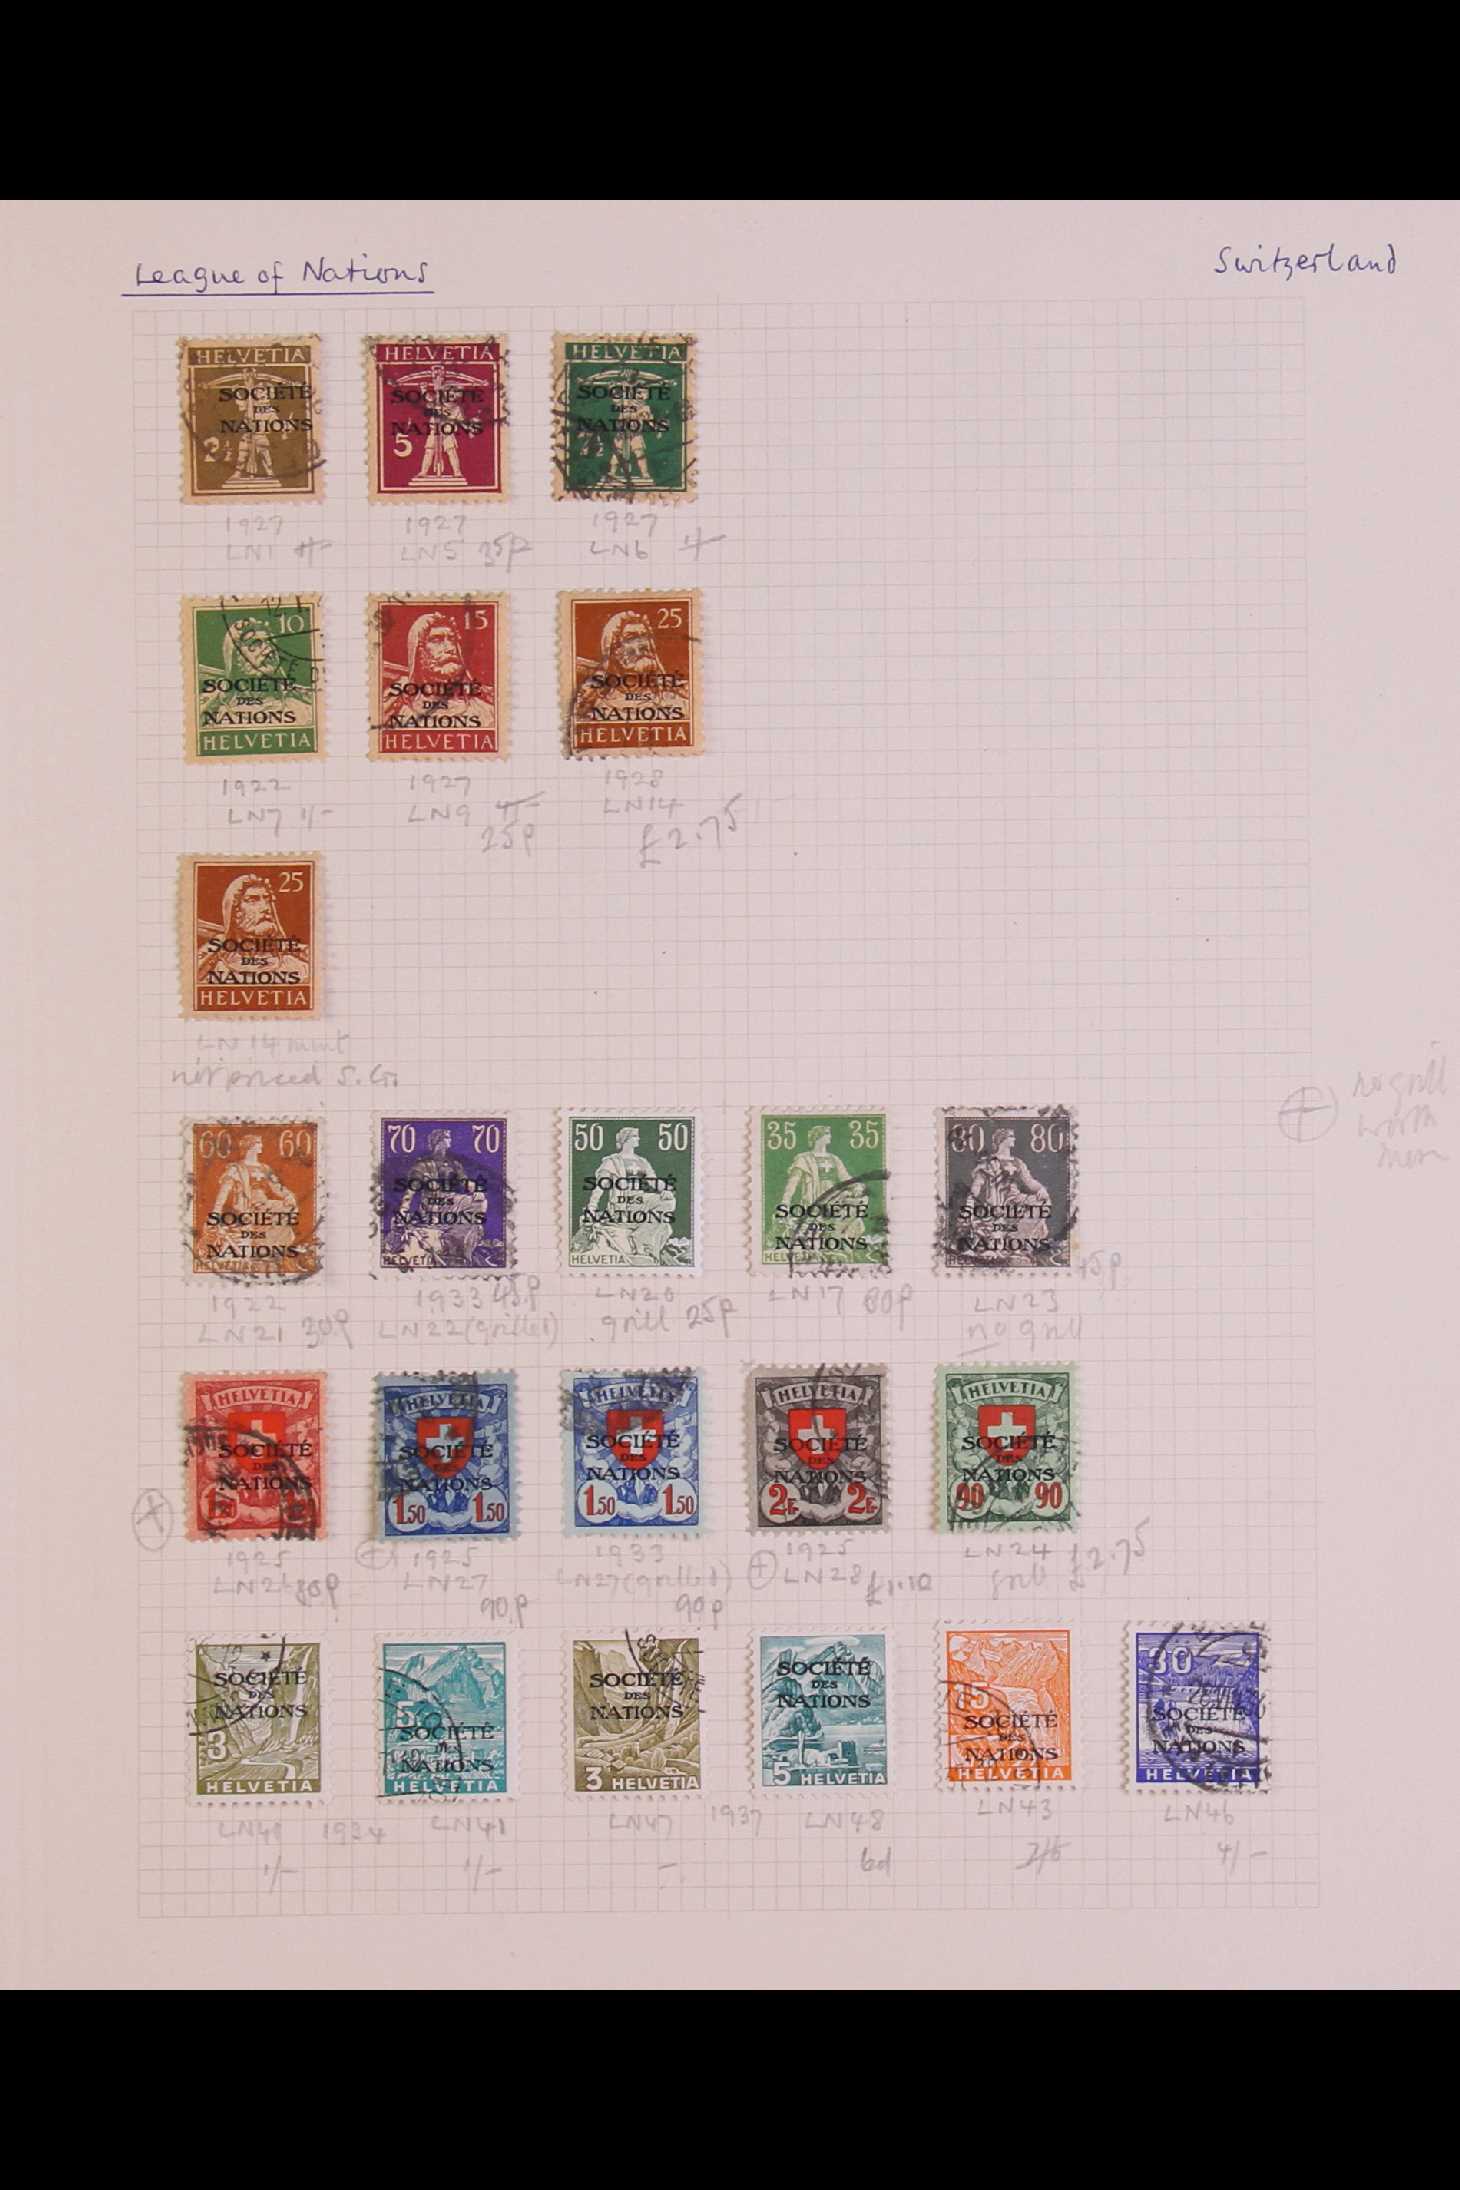 SWITZERLAND 1850 - 1959 COLLECTION of chiefly used stamps on leaves, incl 1850 5r & 10r, 1851 5r, - Image 15 of 17